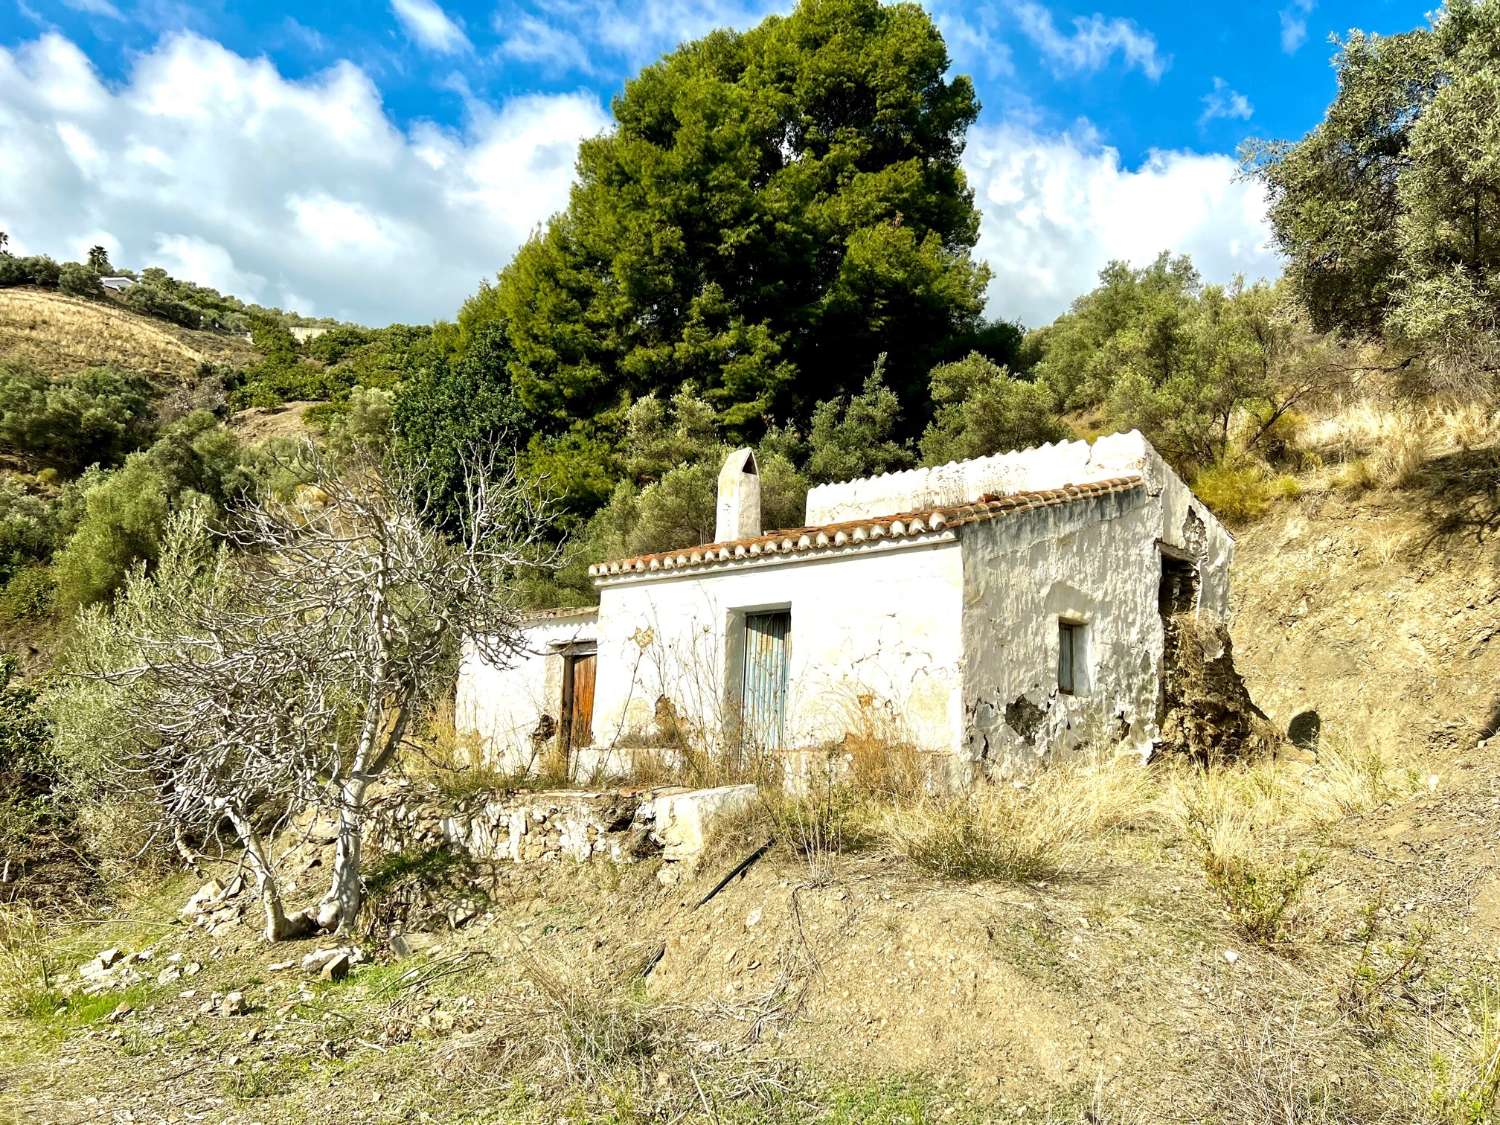 Beautiful plot with an old country house in Frigiliana.